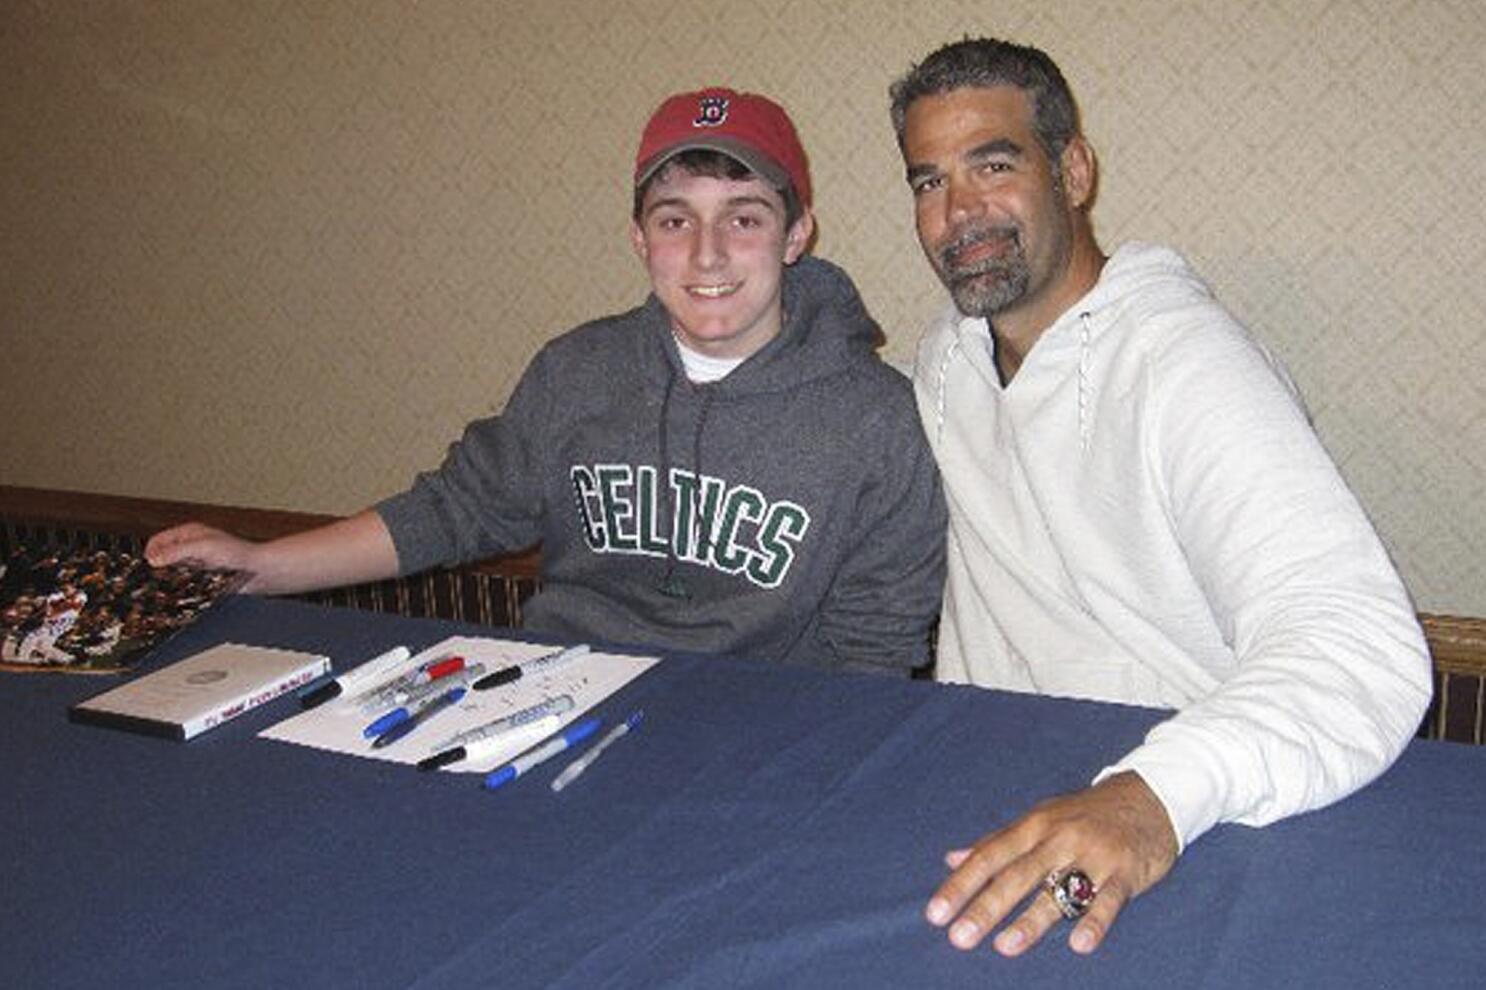 Autographed Red Sox Jersey- Mike Lowell